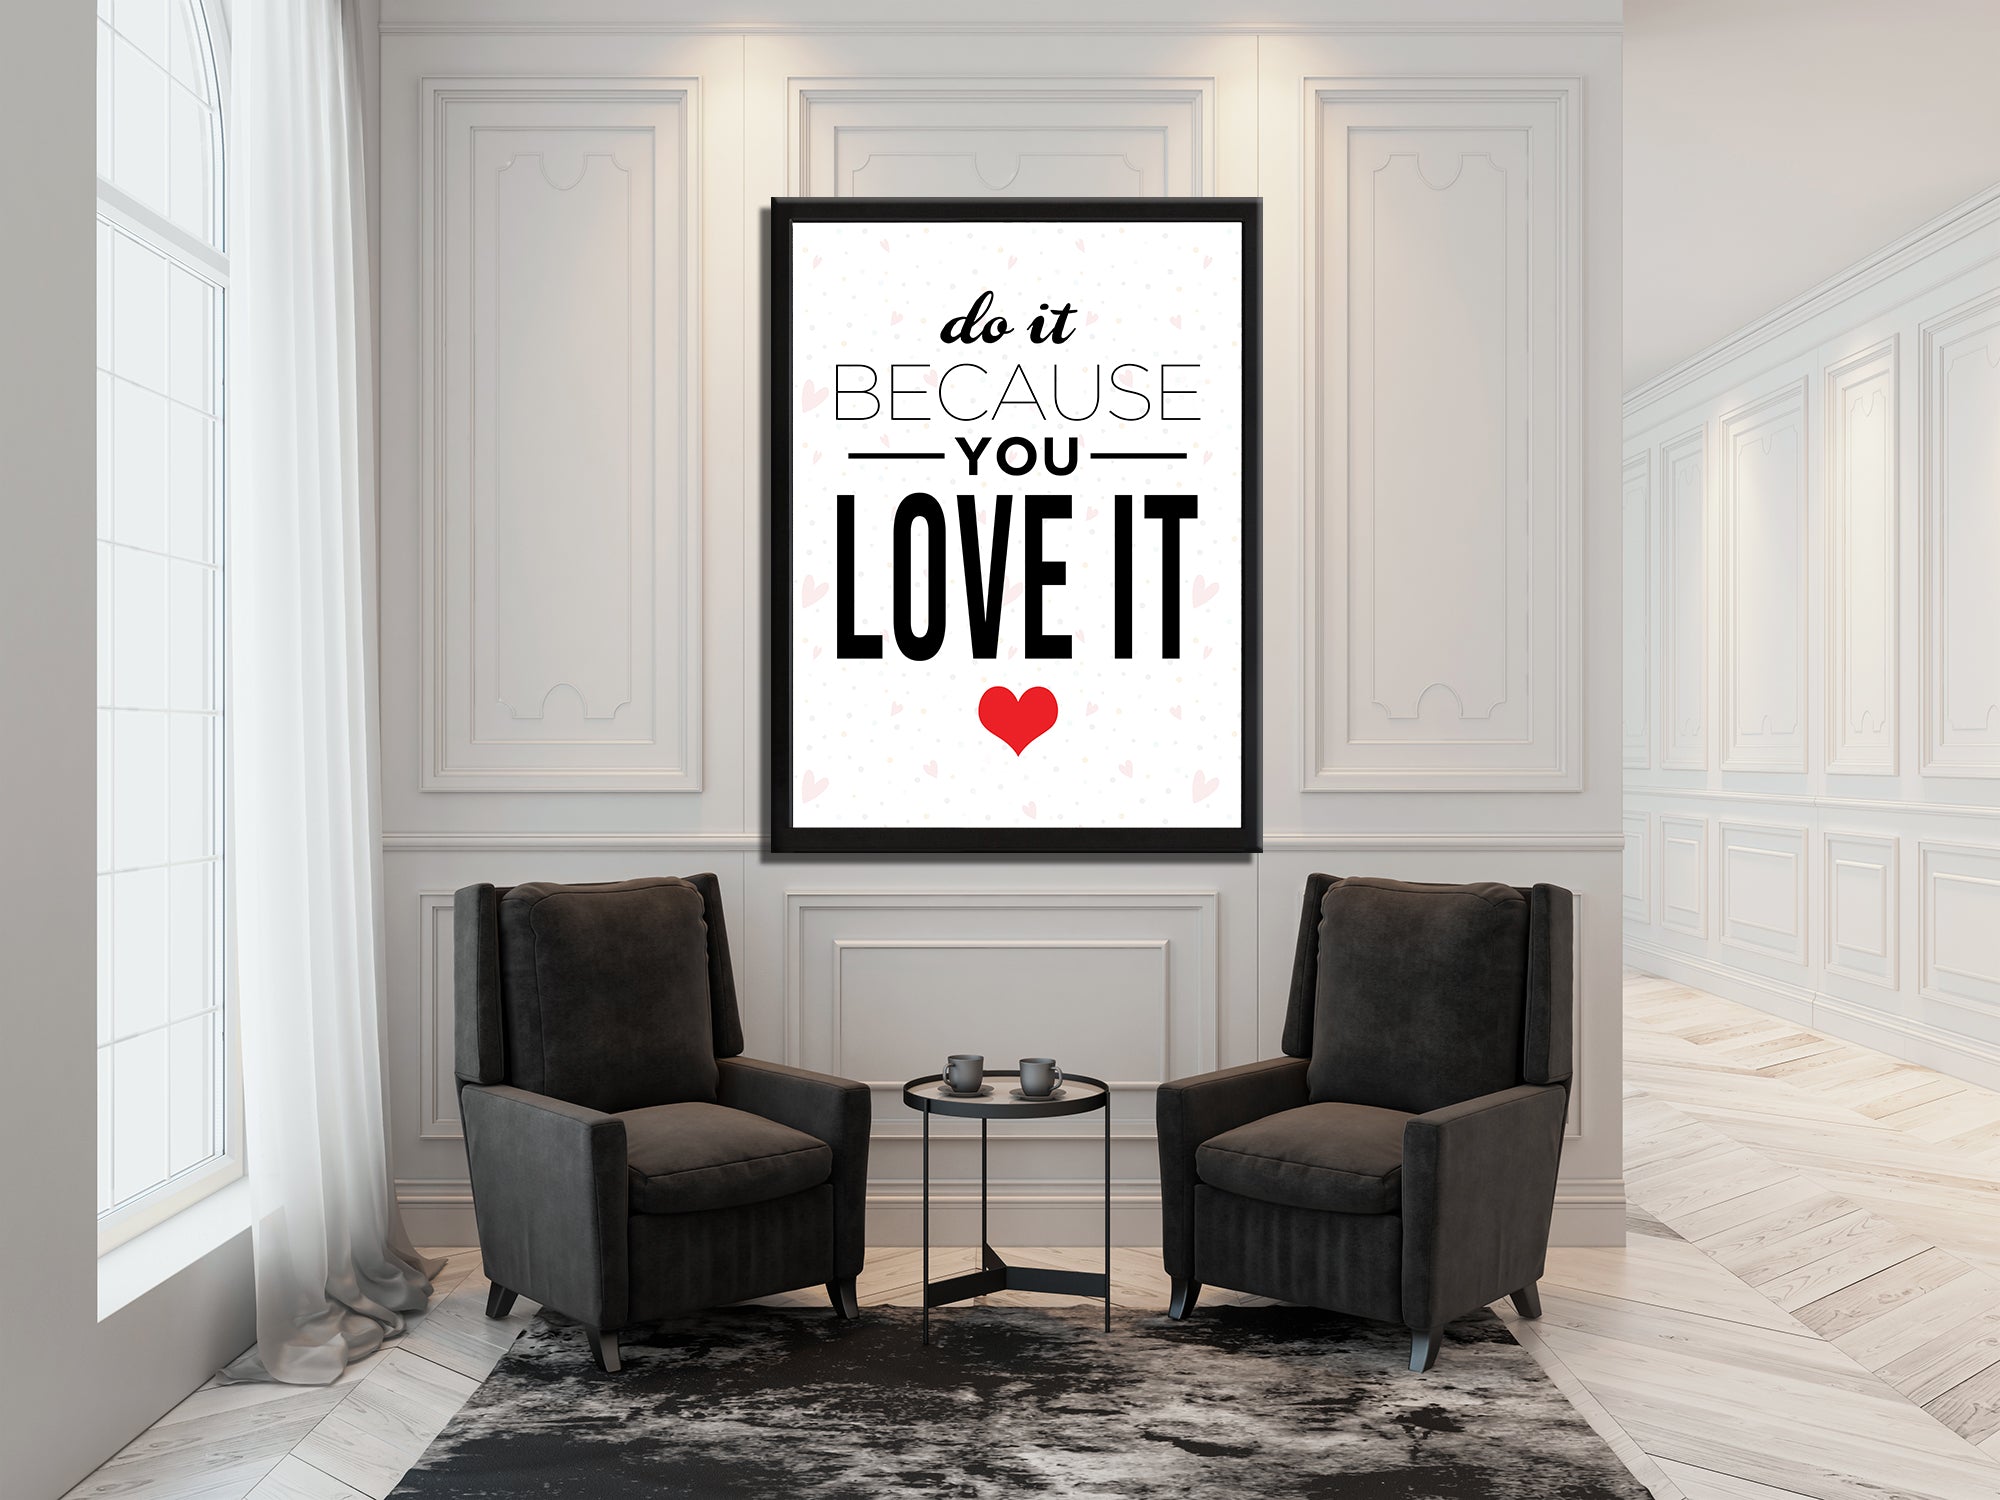 Do It Because You Love It - Motivational - Living Room Canvas Wall Art